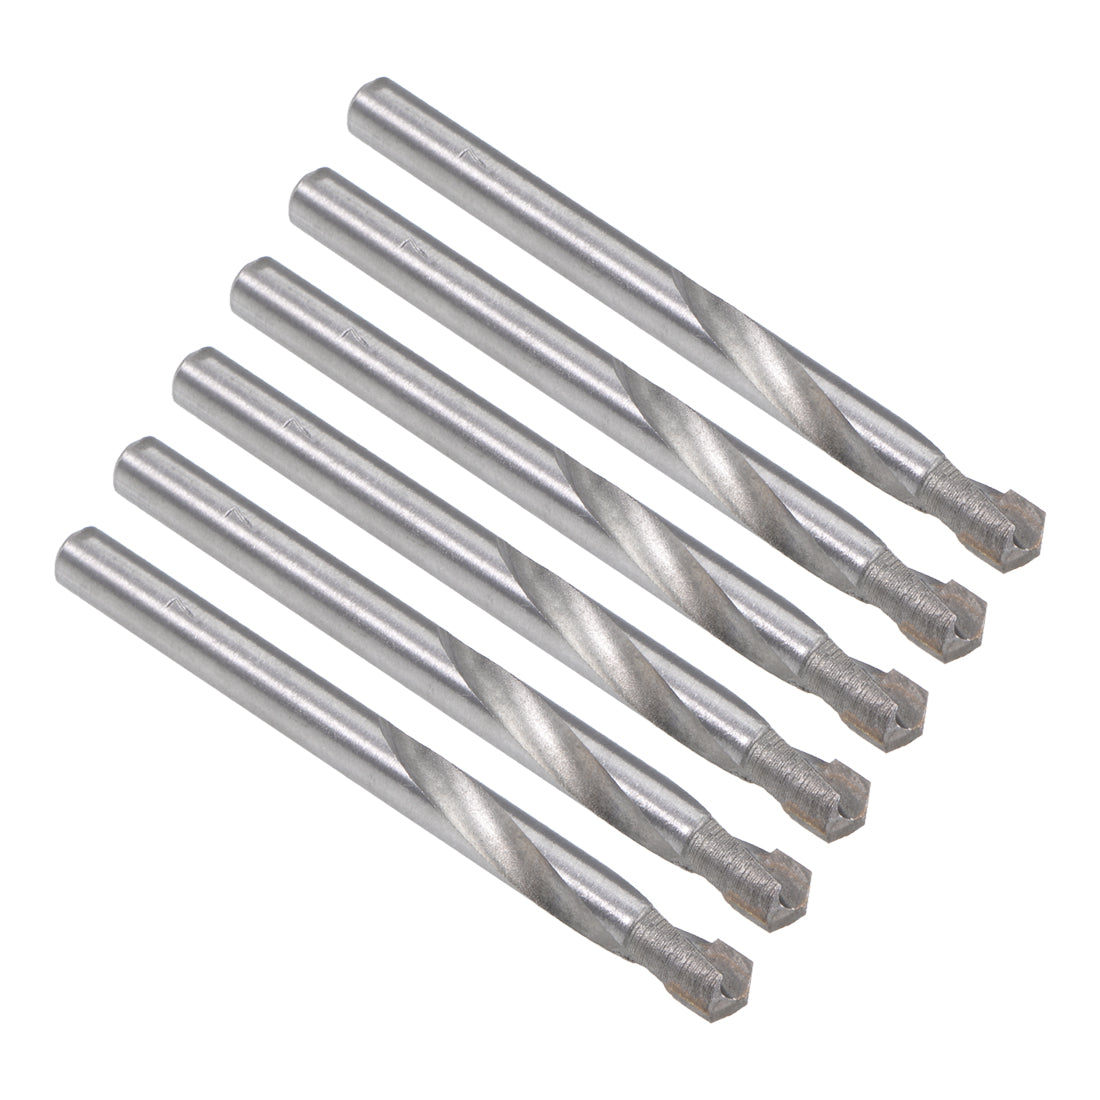 uxcell Uxcell 7mm Cemented Carbide Twist Drill Bits for Stainless Steel Copper Aluminum 6 Pcs